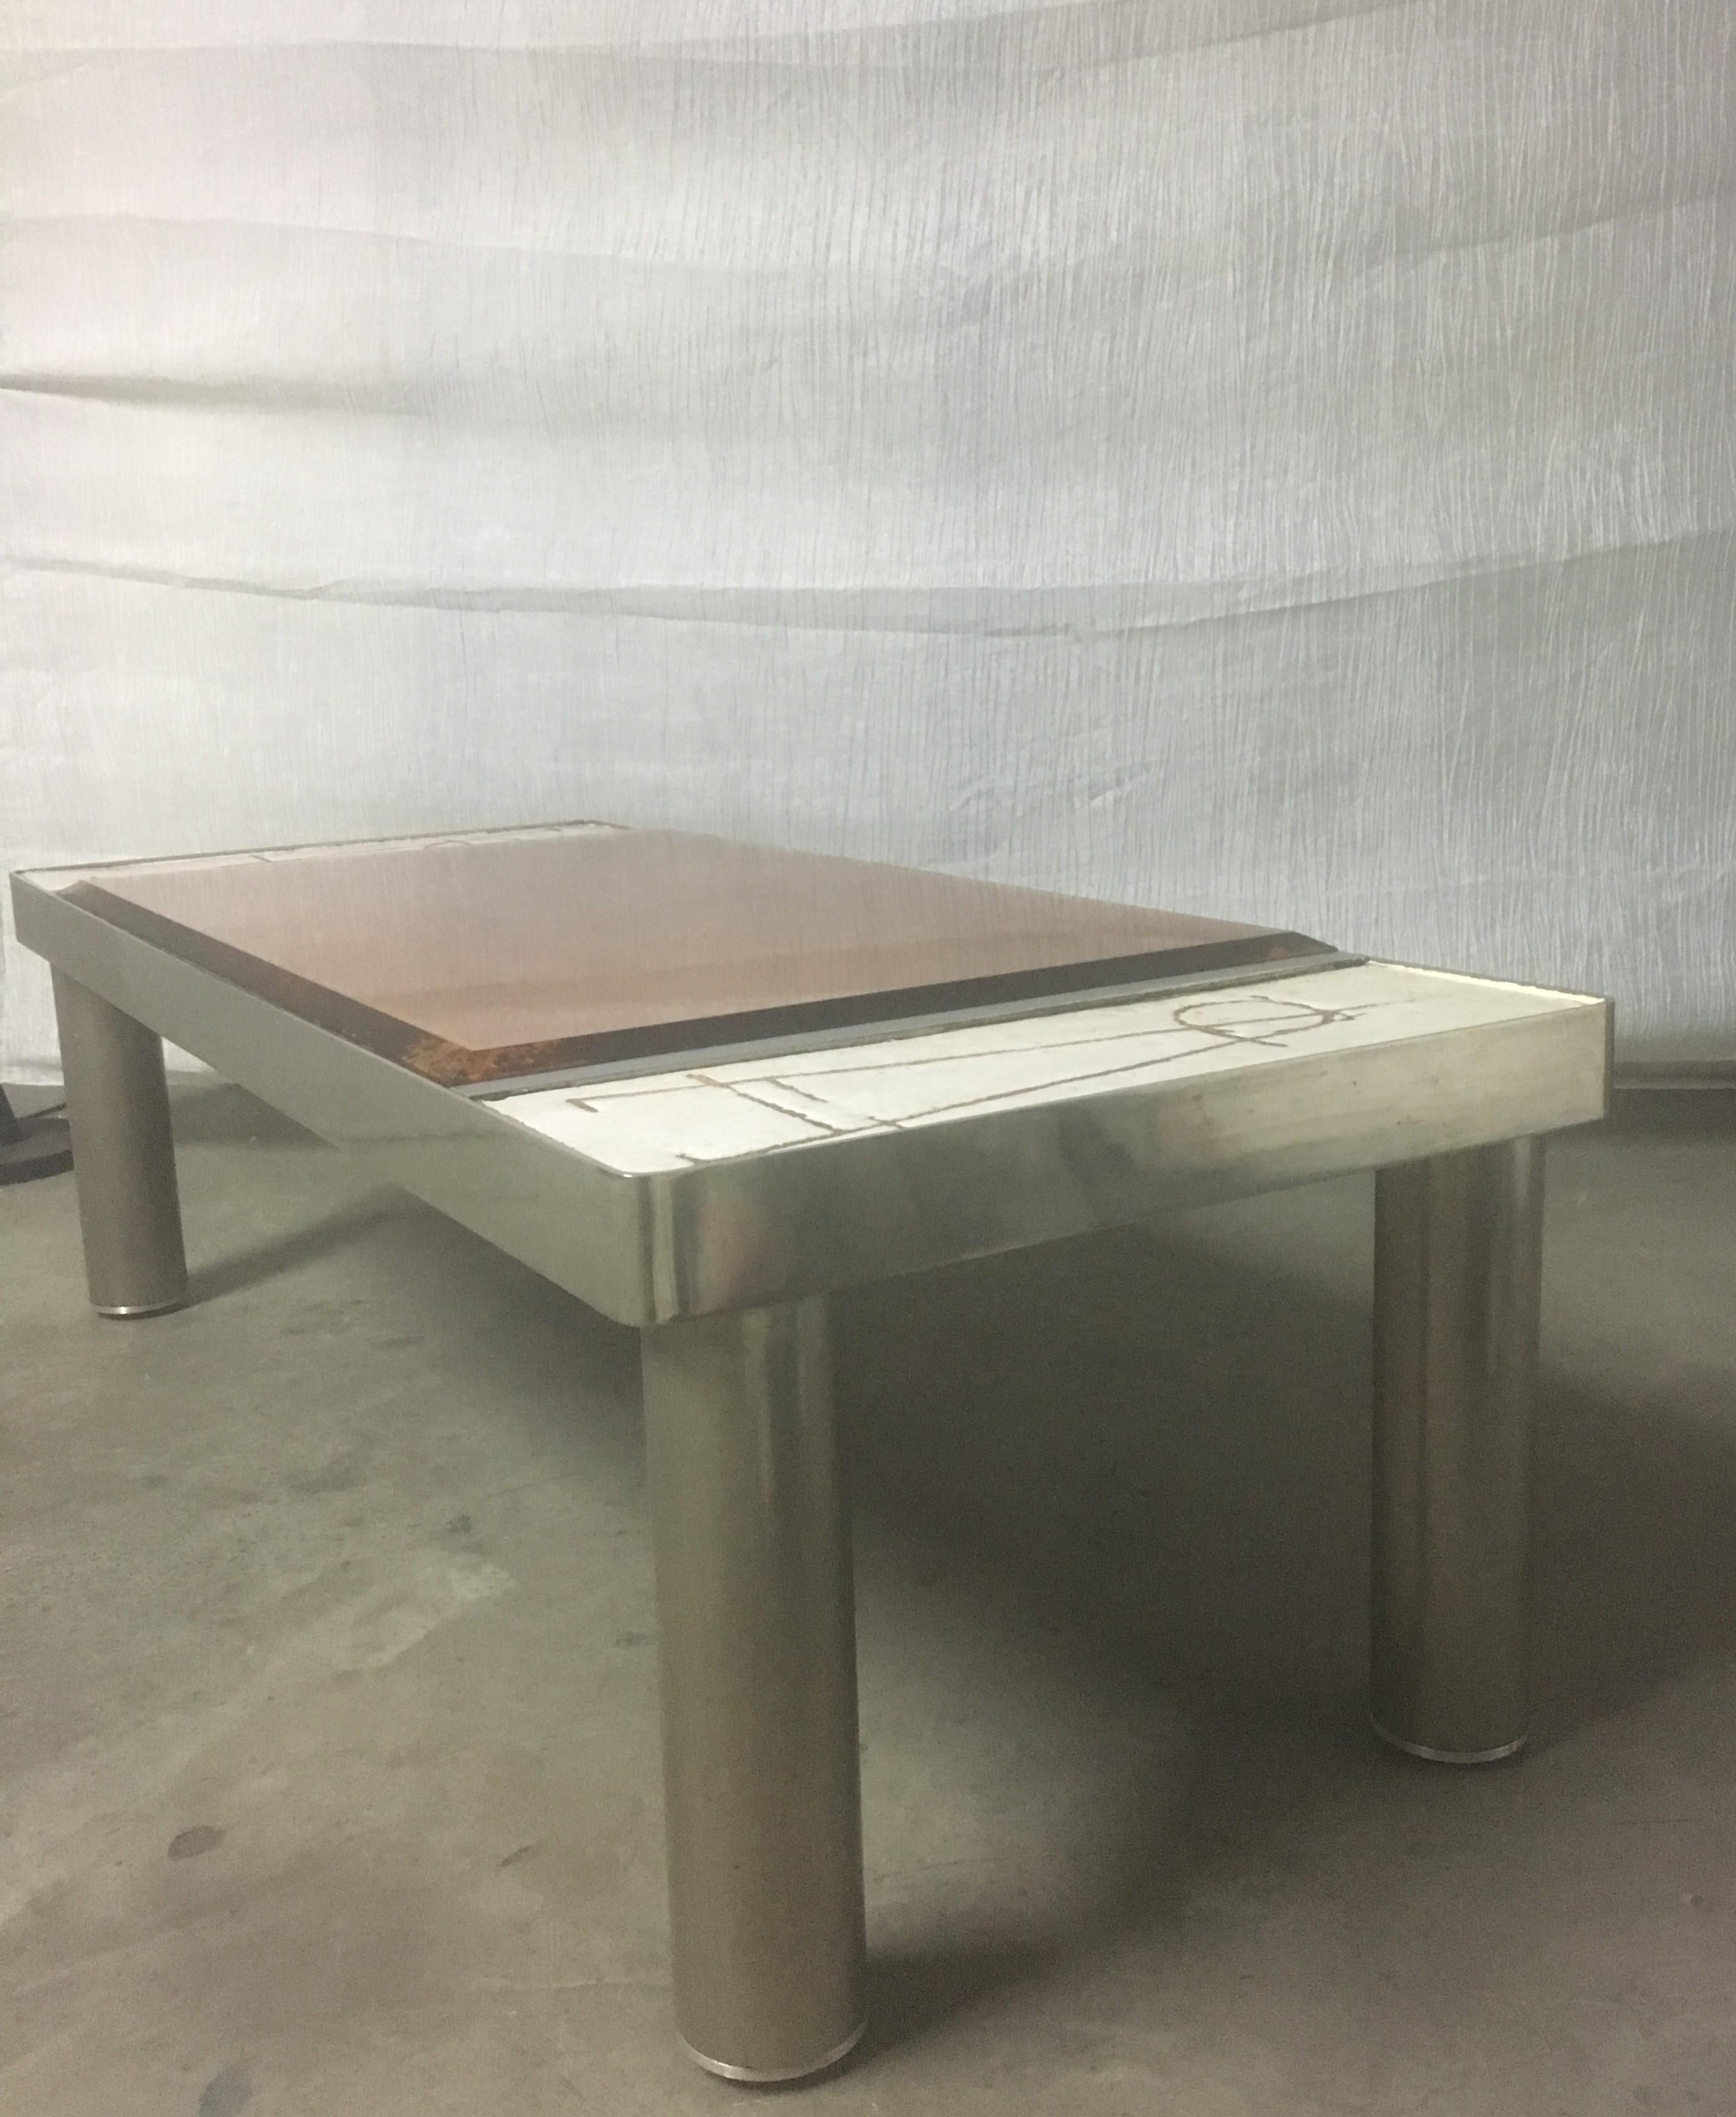 French Ceramic and Chromed Metal Rectangular Coffee Table, Brown Glass Slab Top, 1970s For Sale